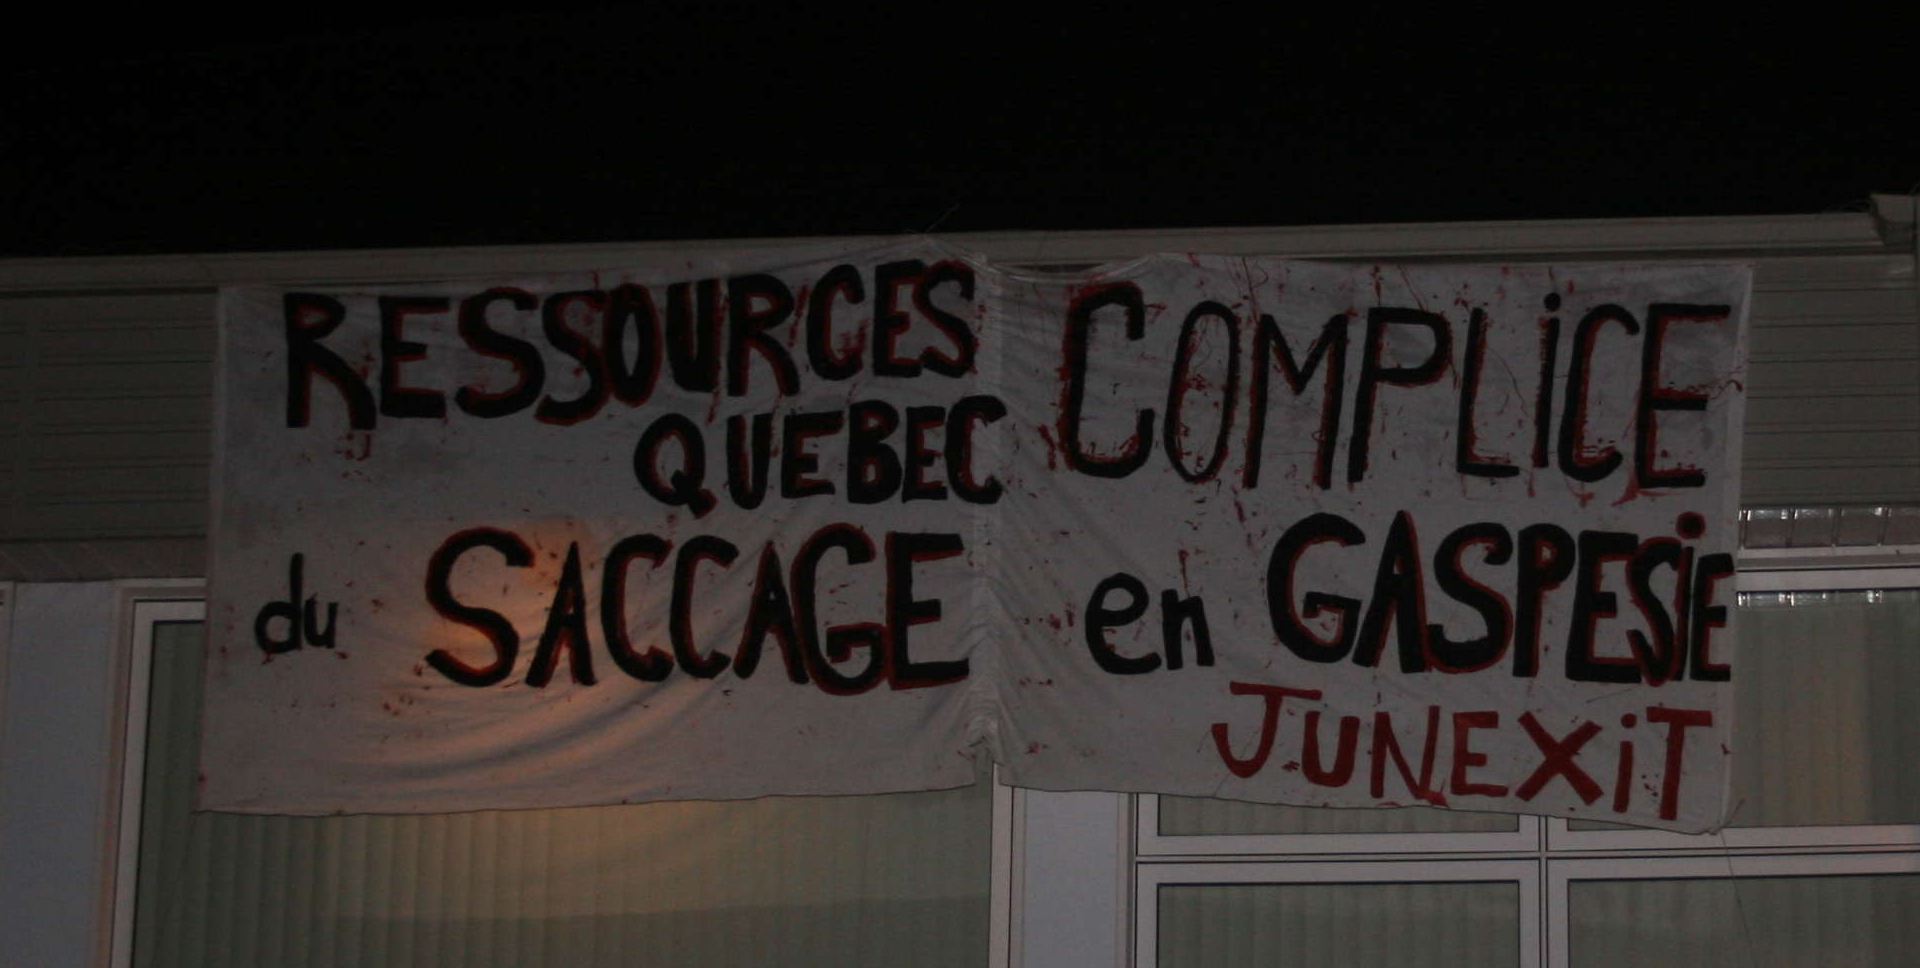 Banner drop at the Resources ministery in Caplan, Gaspesie!!